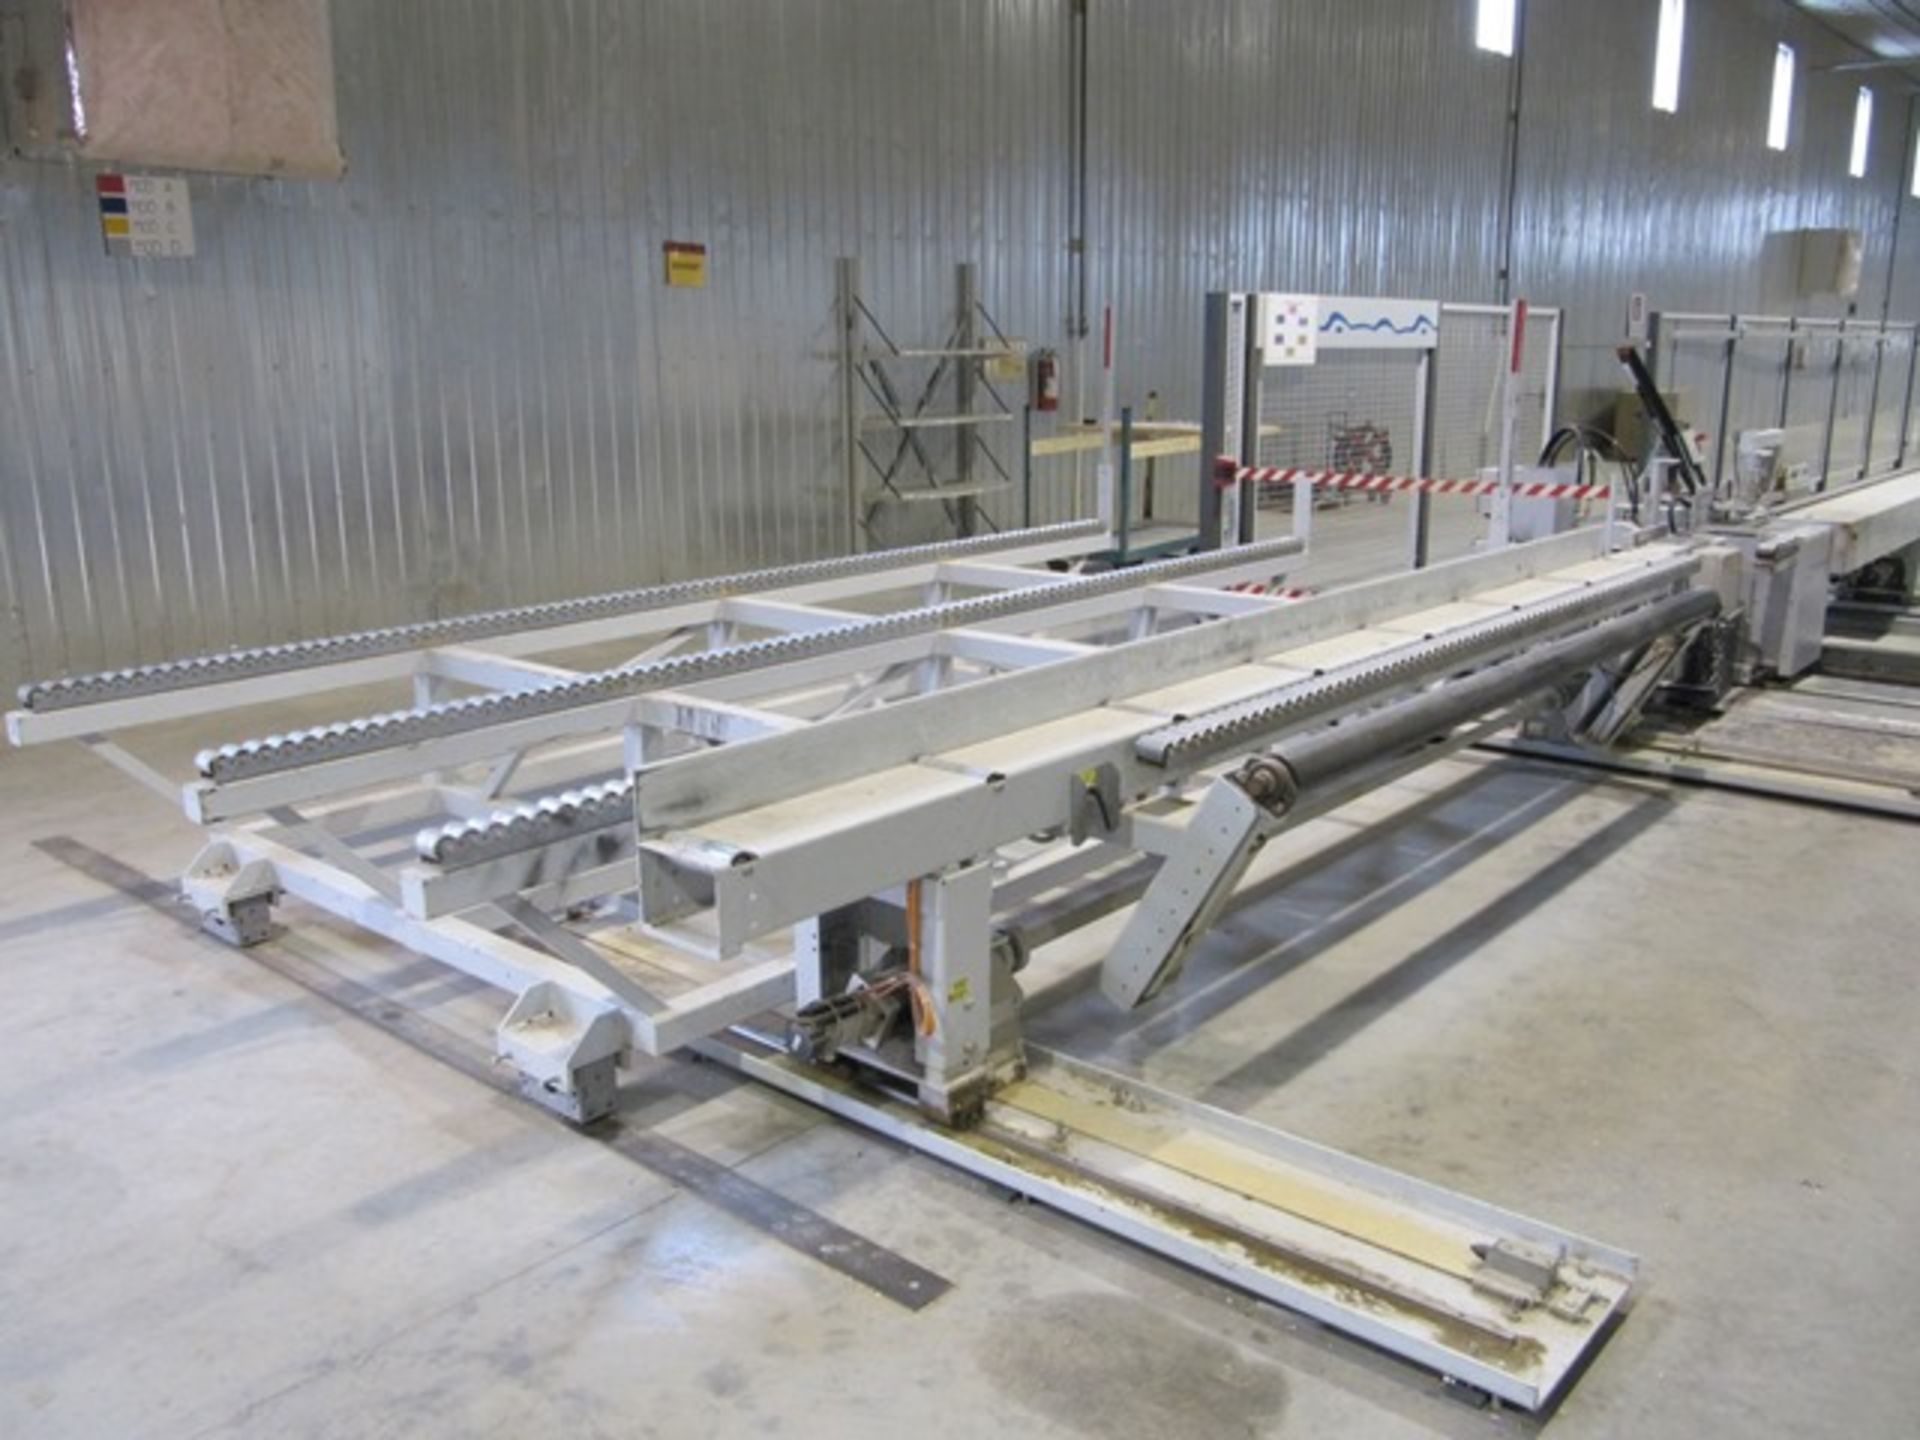 2008 WEINMANN Framing Station, Model WEM 150/12,  In/Out Feed Conveyors   S/N 0-396-14-0026 - Image 3 of 6